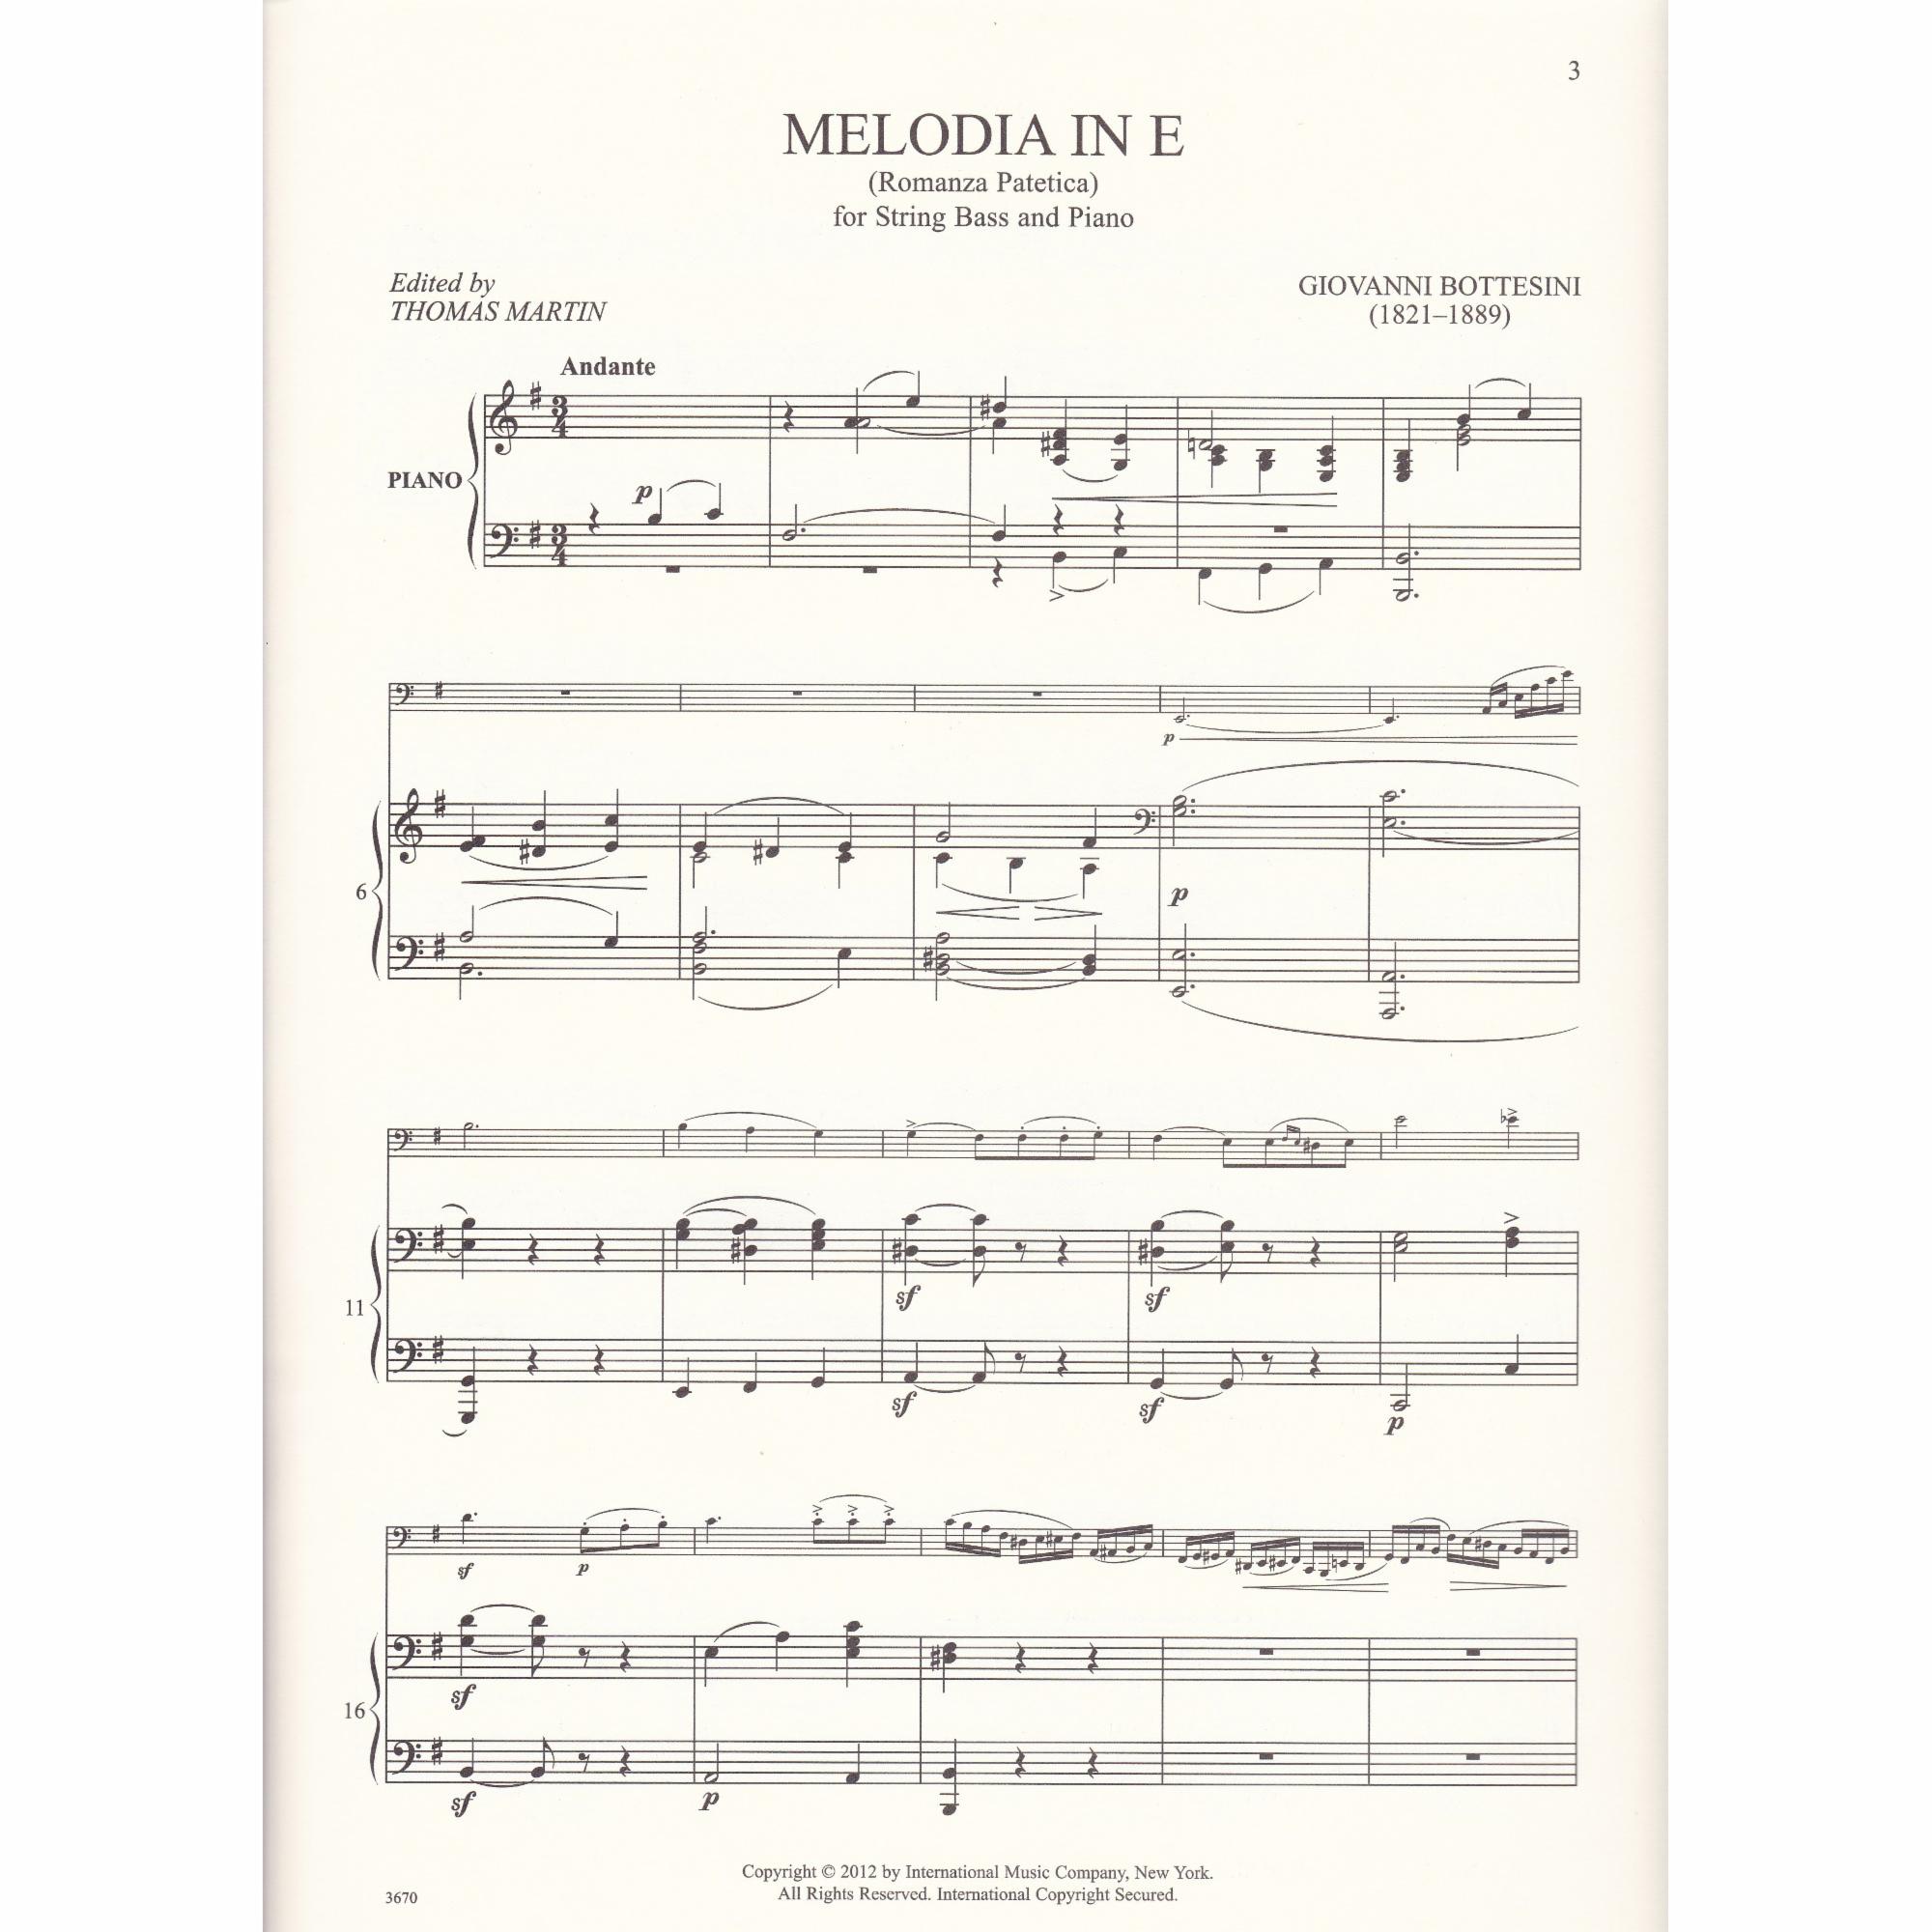 Two Melodies for String Bass and Piano